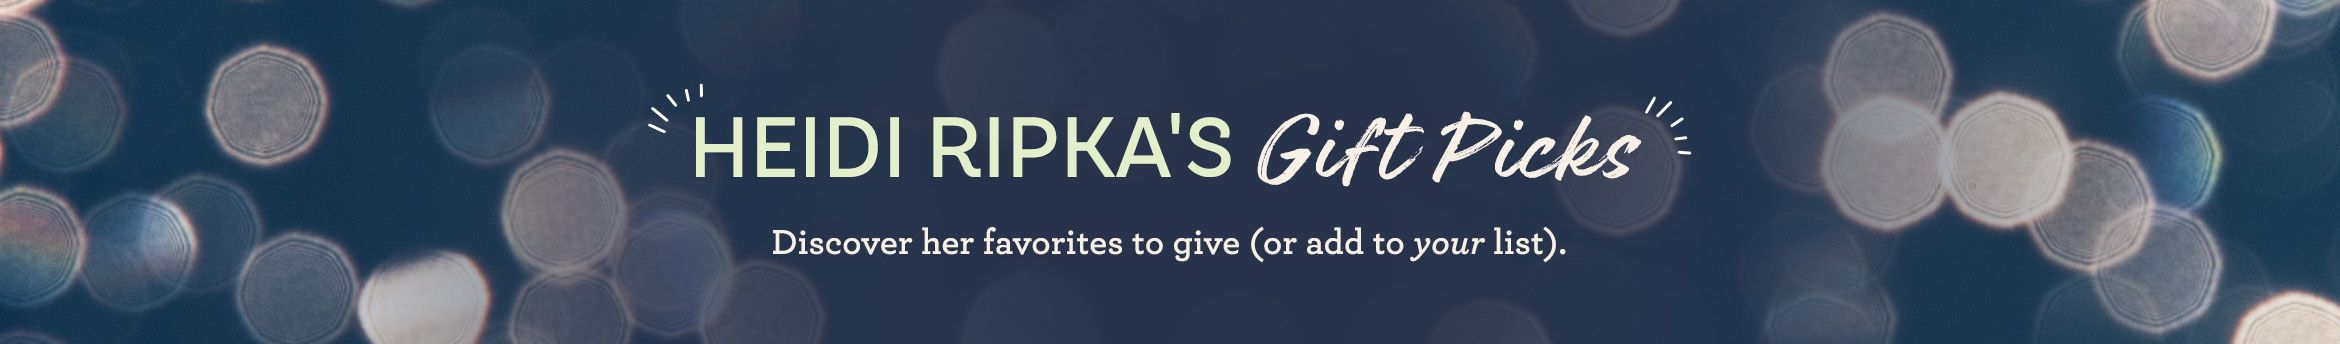 Heidi Ripka's Gift Picks. Discover her favorites to give (or add to your list).